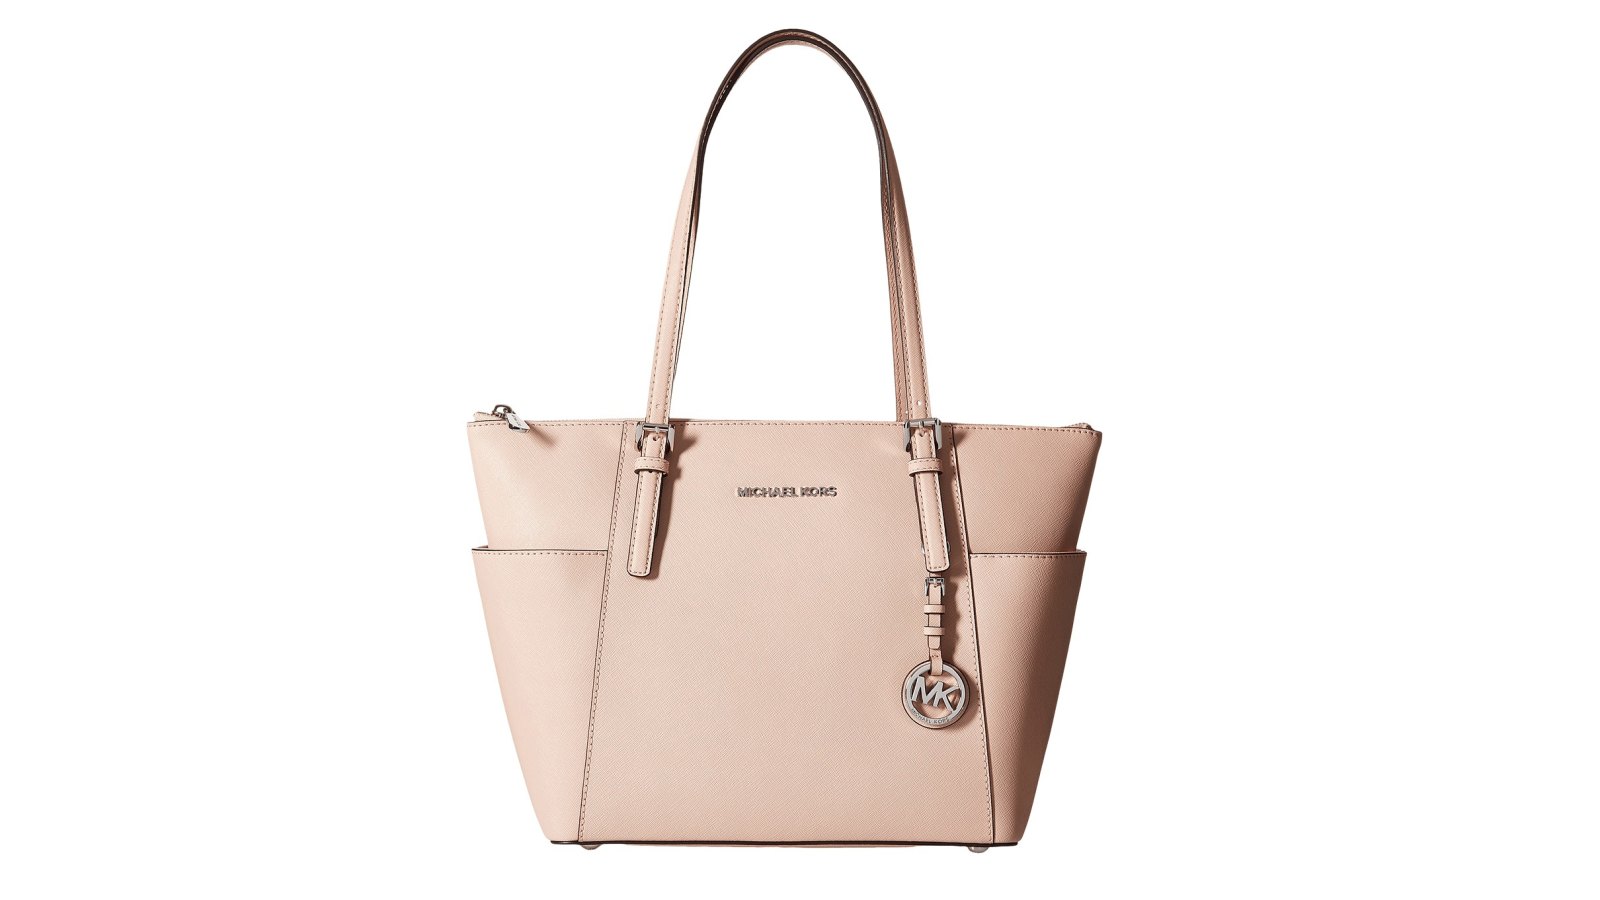 Shoppers Are Obsessed With this Michael Kors Bag and It's Obvious Why